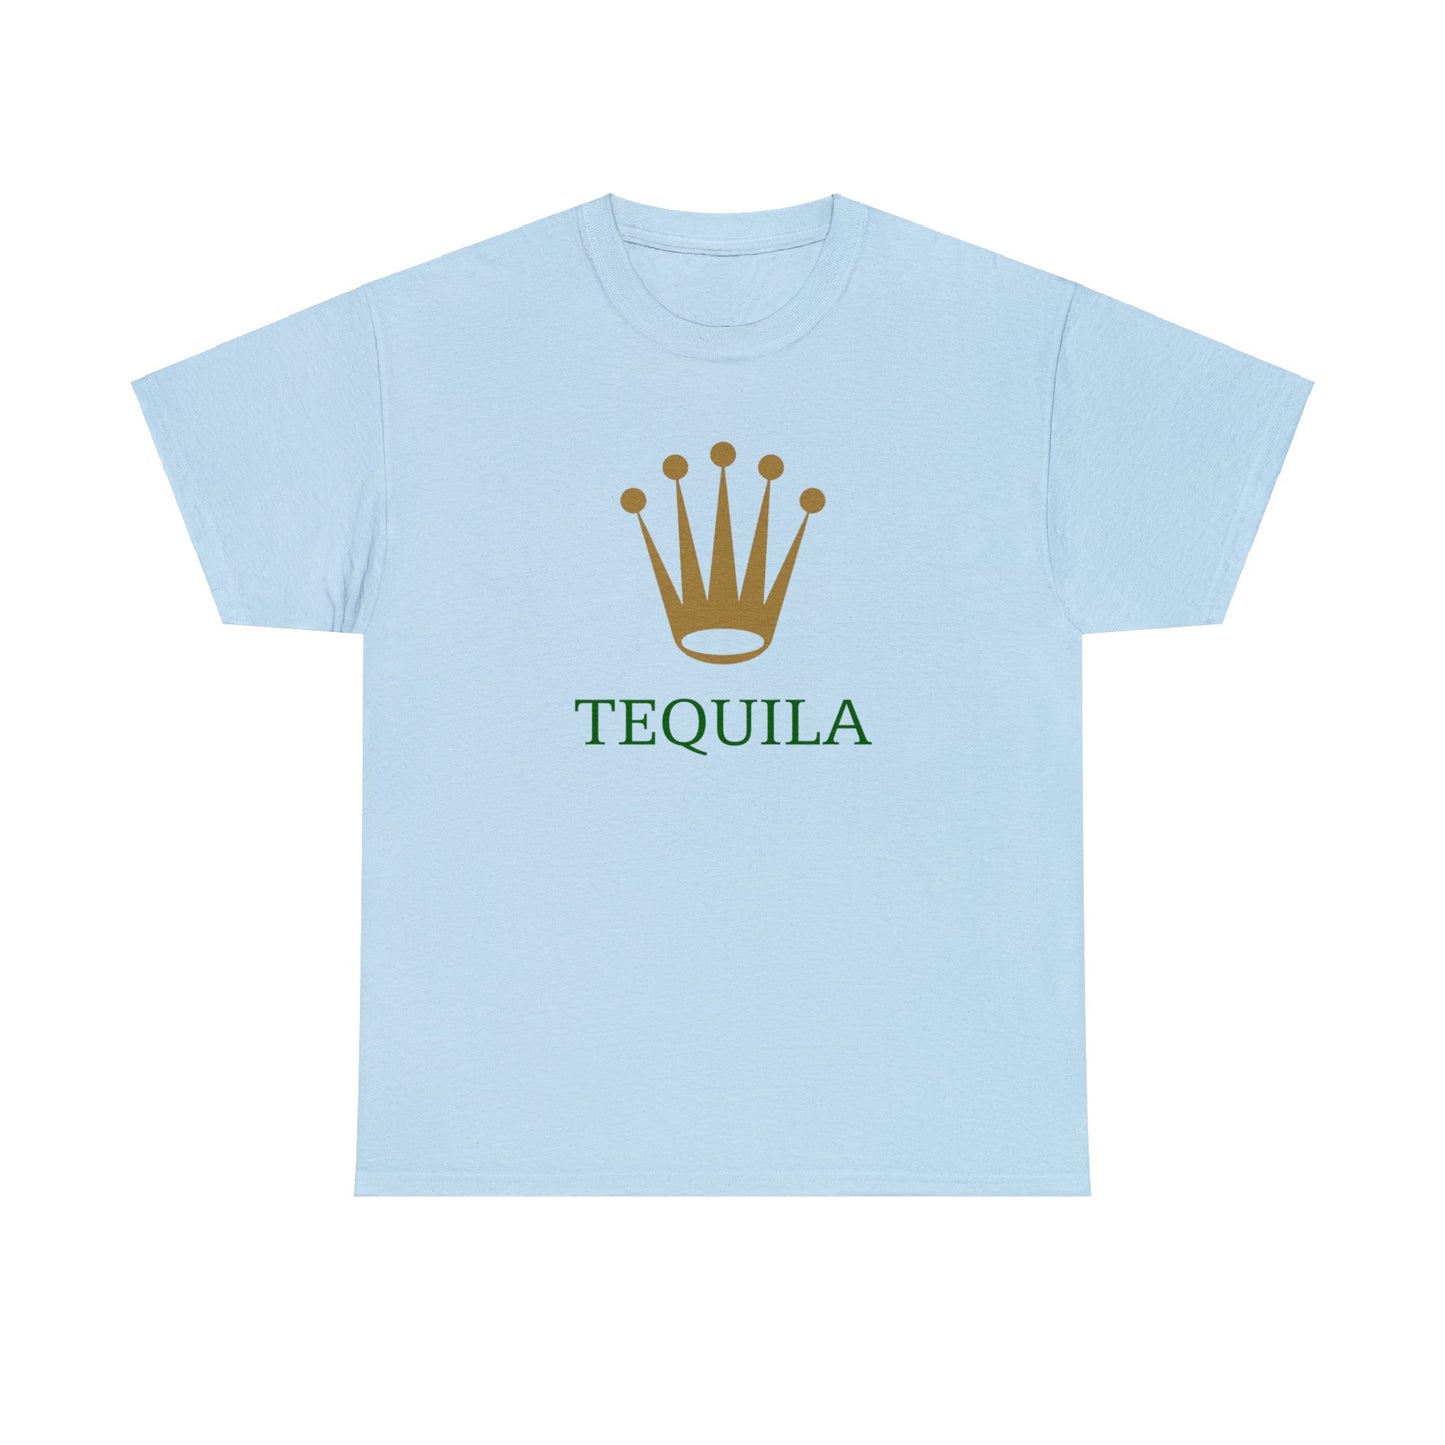 Tequila is King